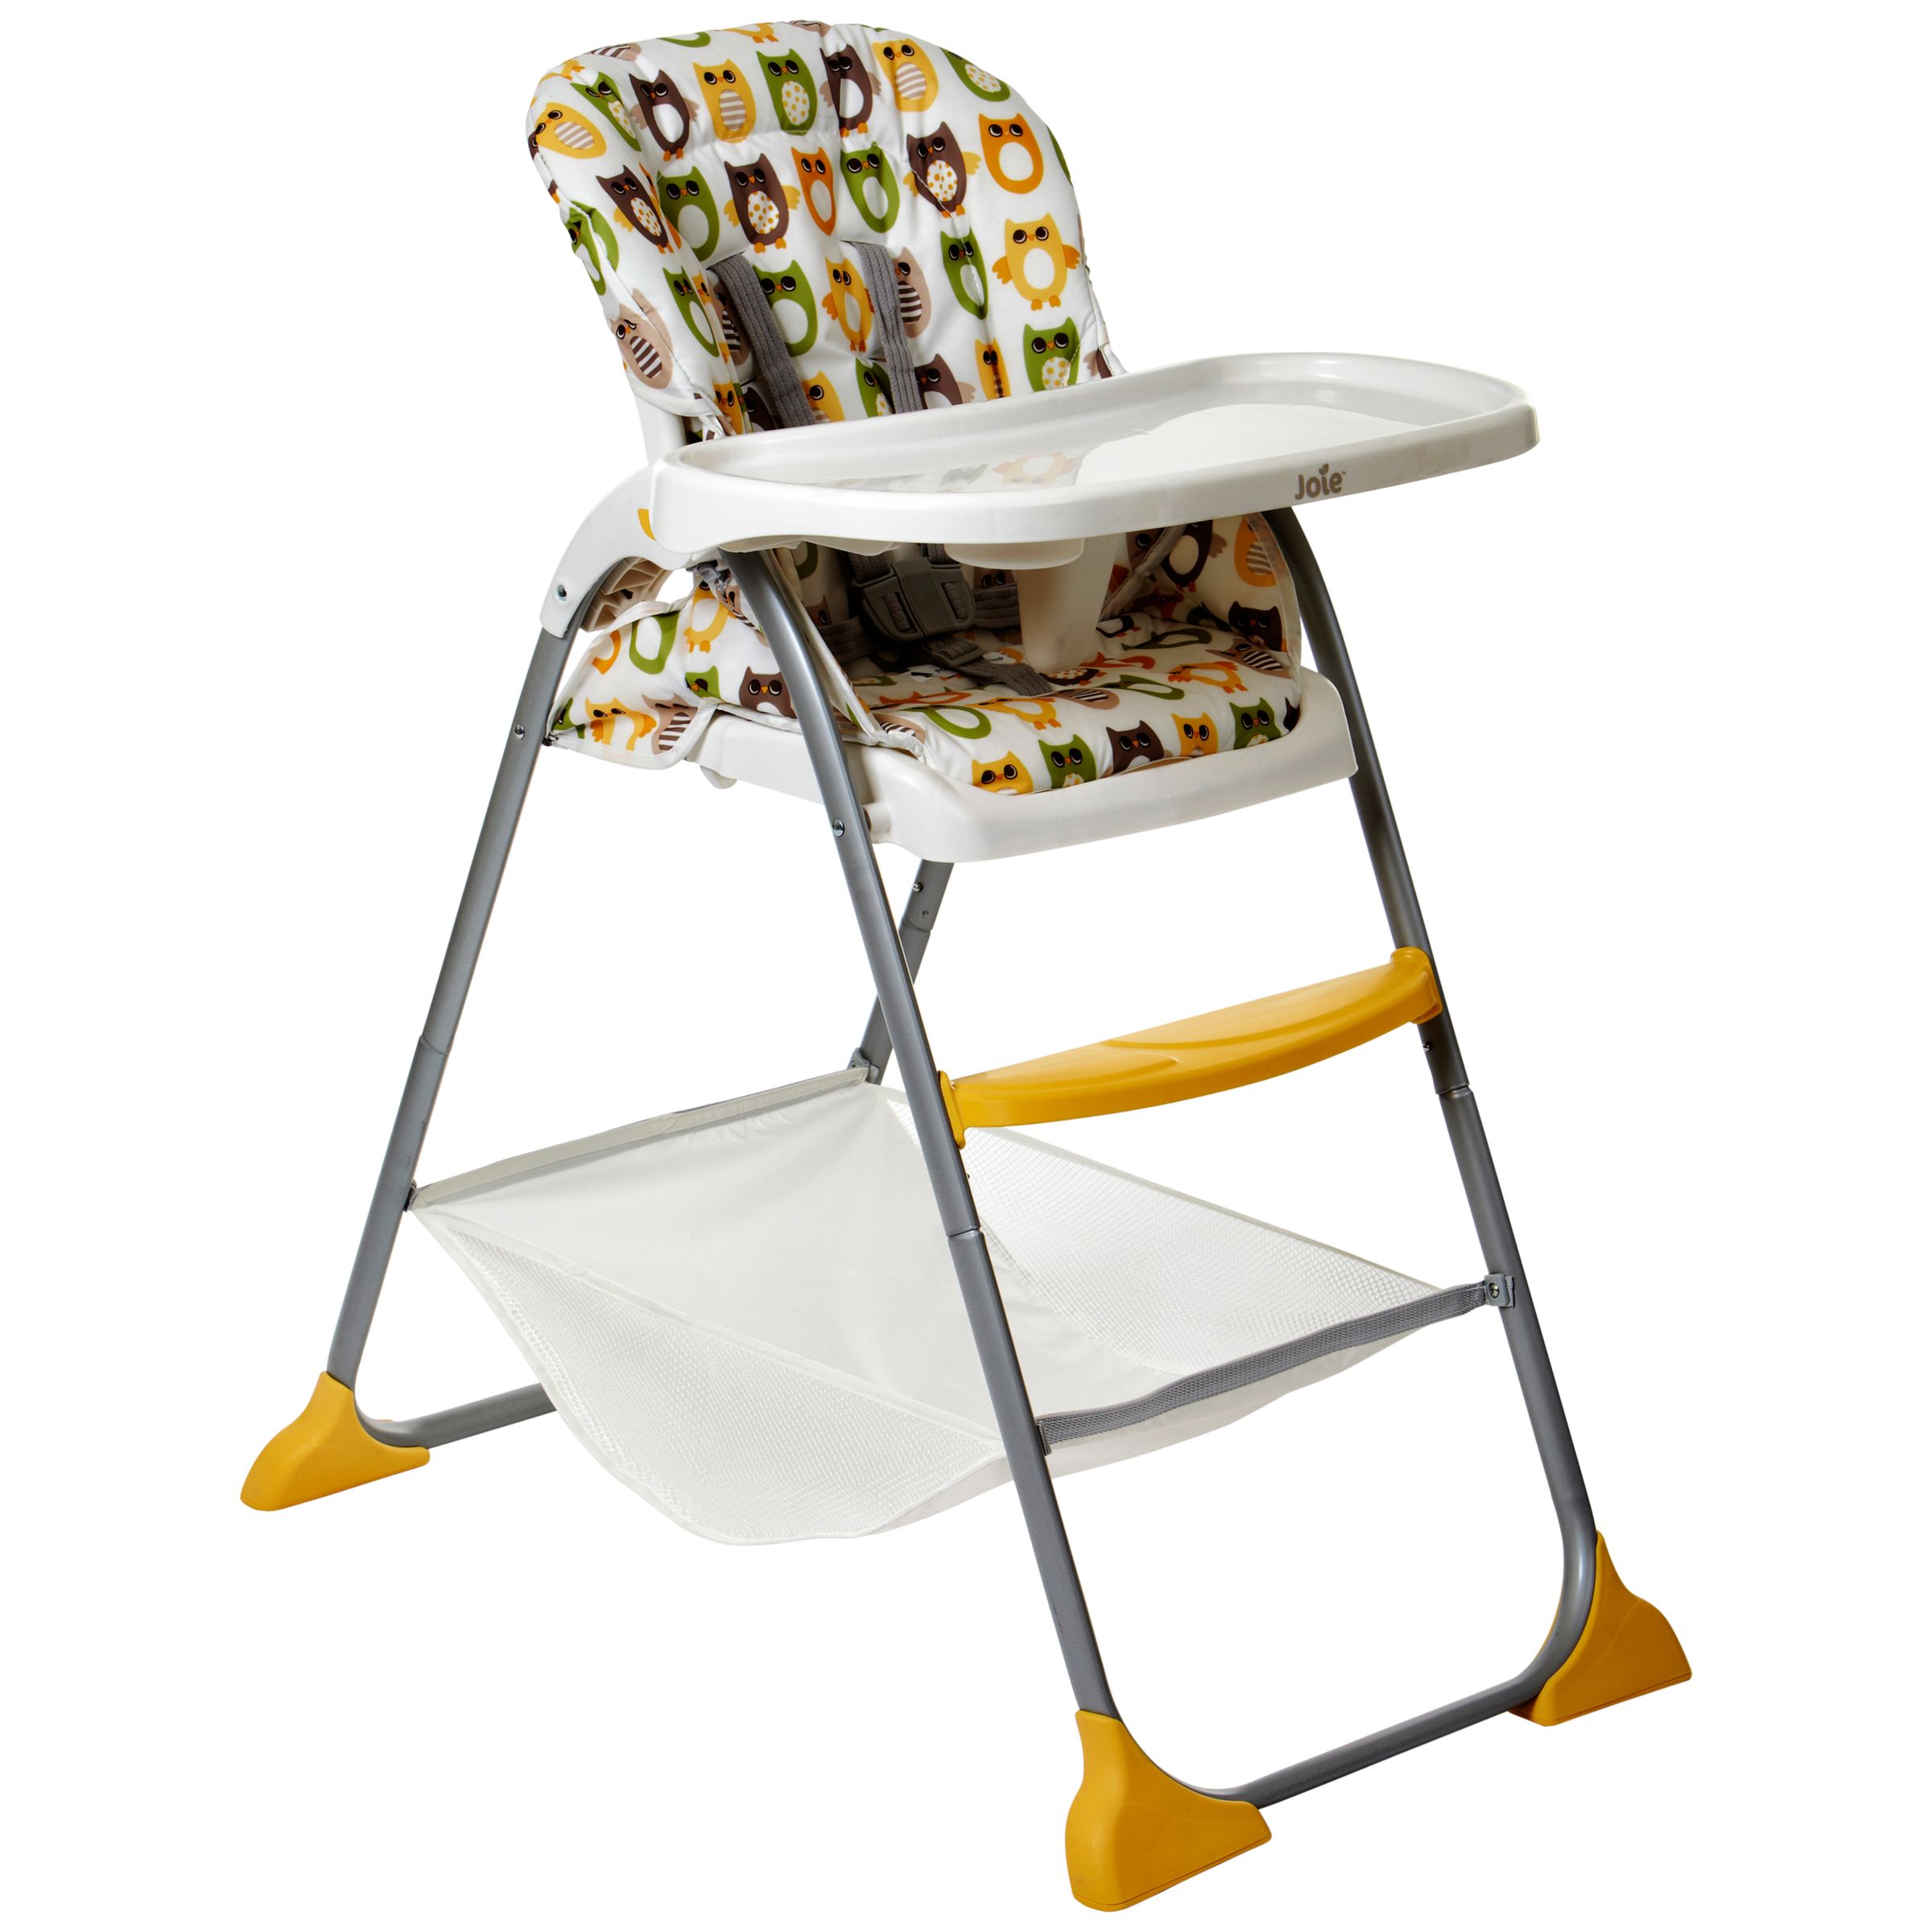  Joie  Baby Mimzy  Snacker Highchair Owl at John Lewis 